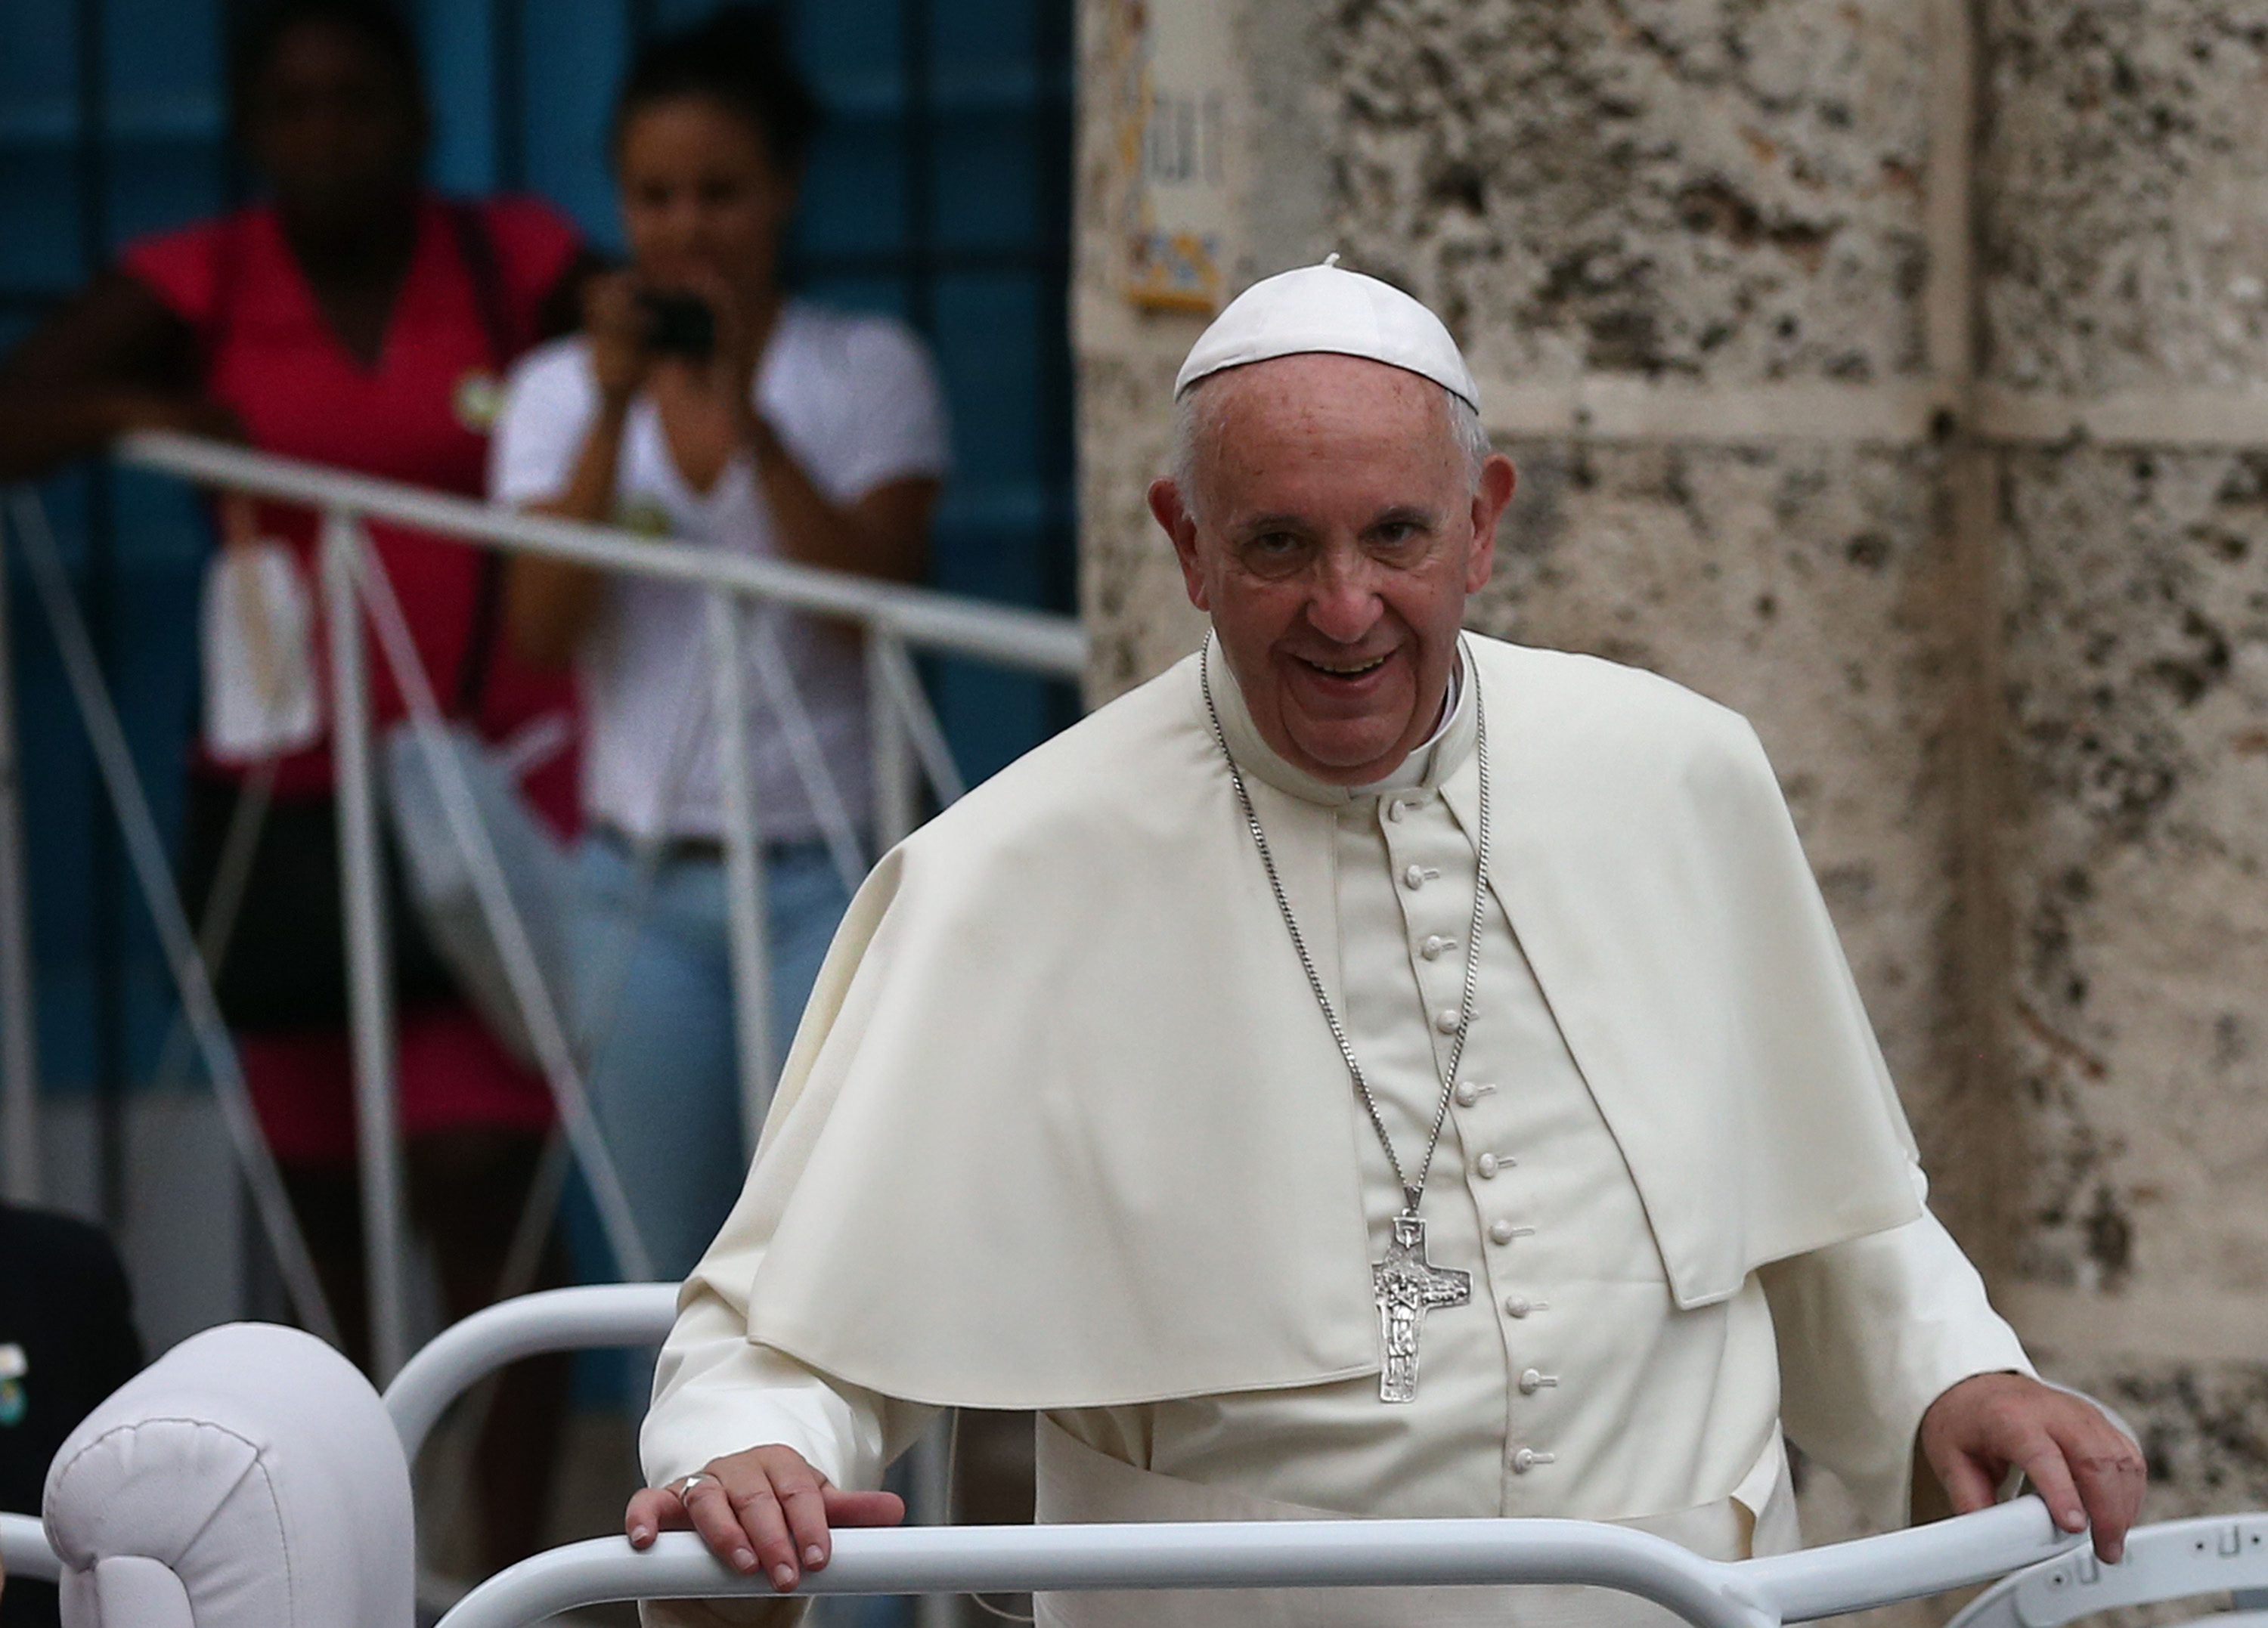 Pope Francis looks out from his Popemobile as he arrives at Havana Cathedral in Havana, Cuba on Sept. 20, 2015. (Carl Court—Getty Images)